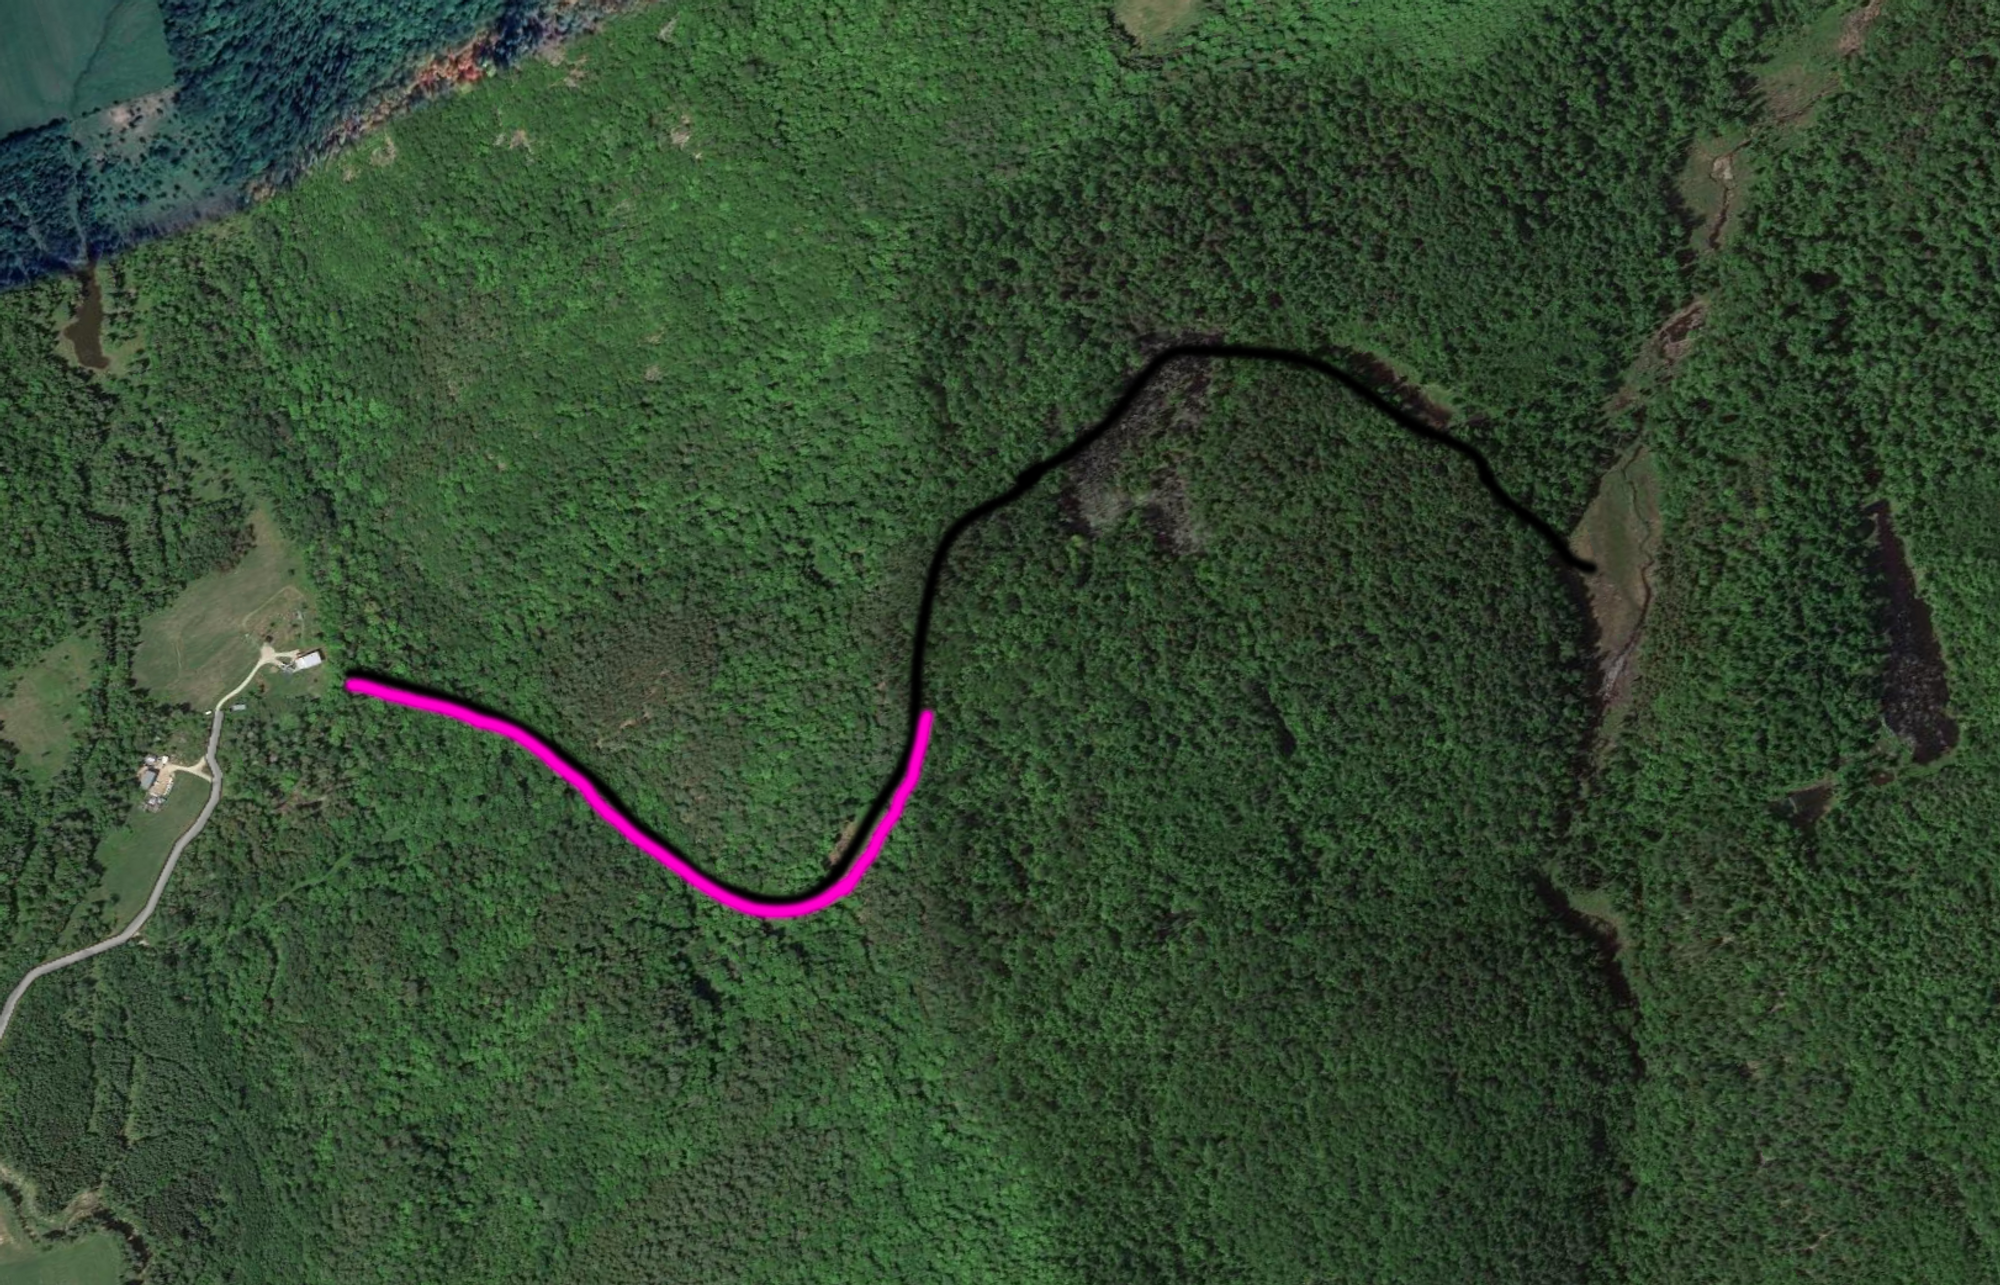 a map of Ferme Lanthorn with the trail highlighted in magenta indicating the route Dan Tapper walked along.